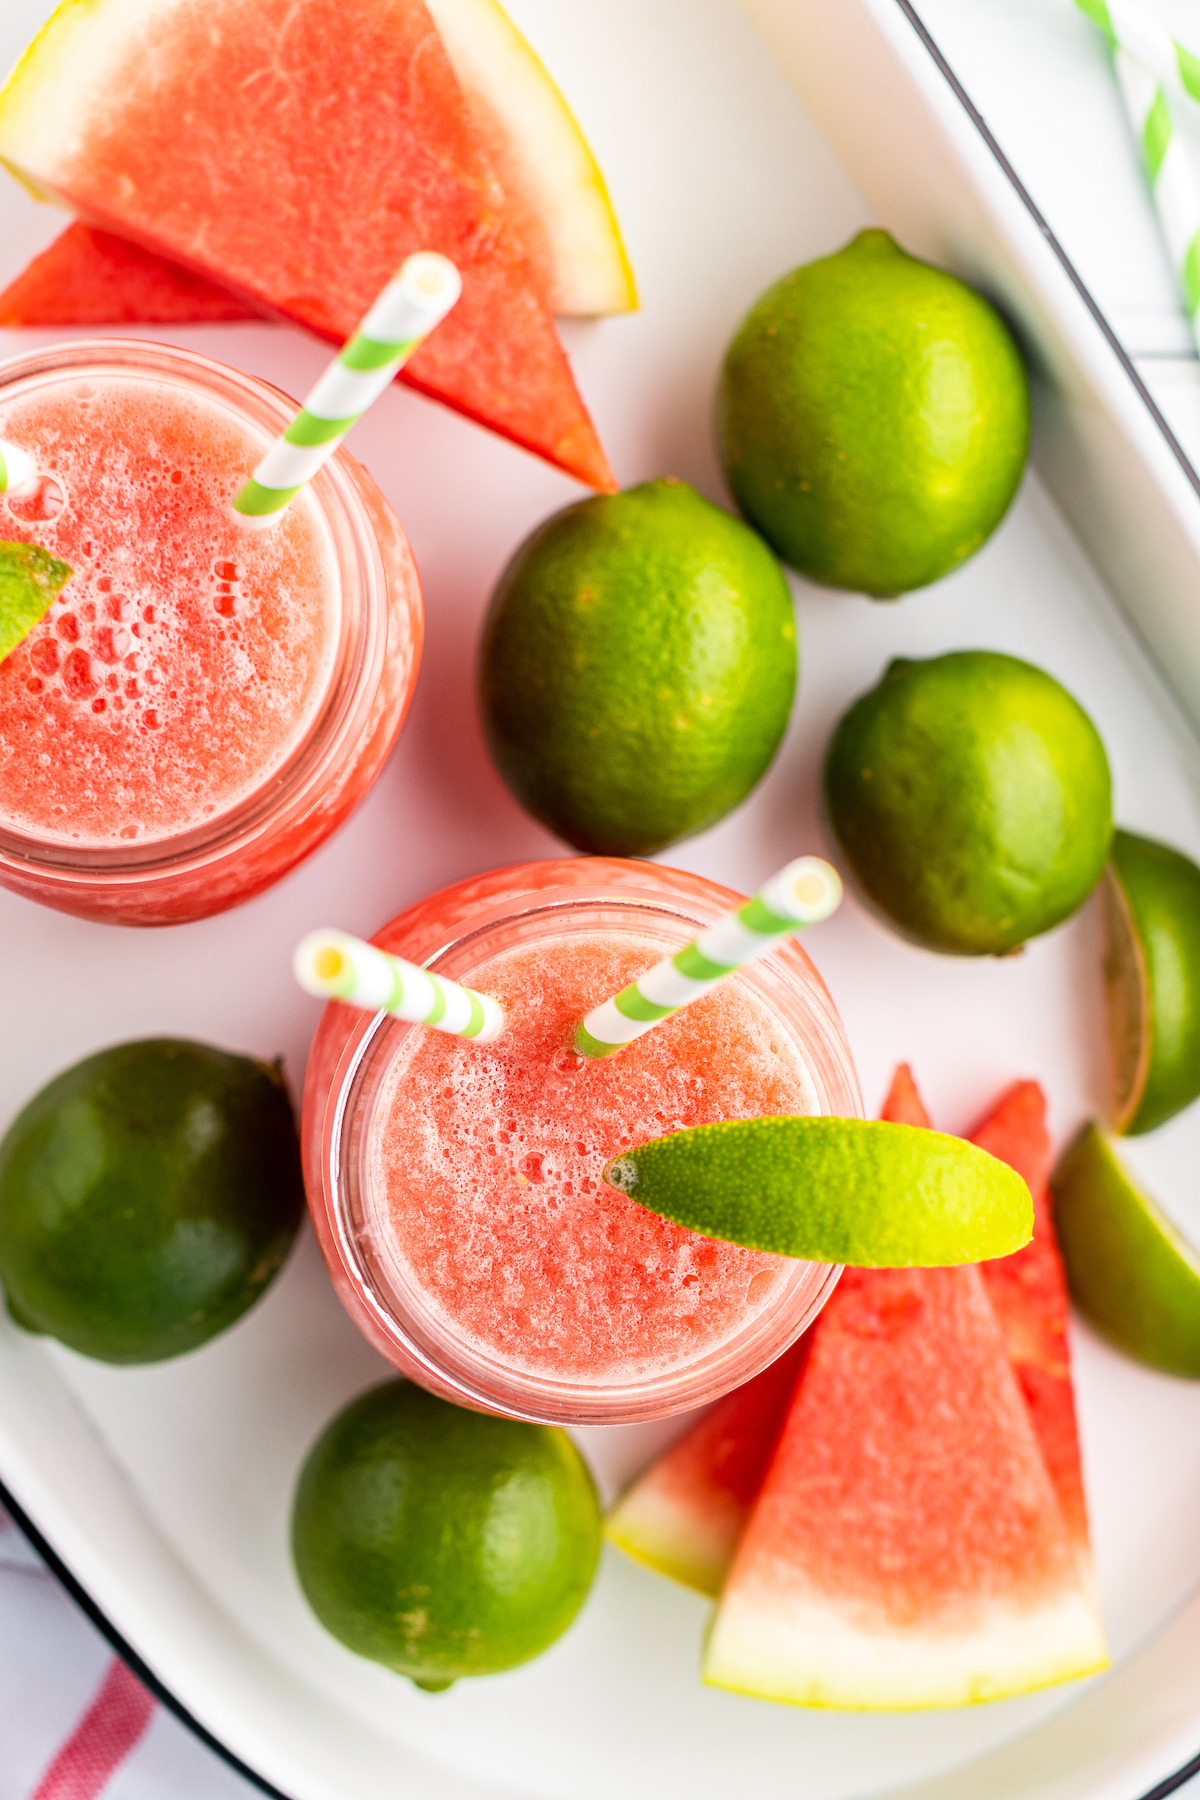 Top view of two watermelon limeade slushies in mason jars side-by-side, garnished with lime wedges and striped straws, on a tray with watermelon slices and limes.